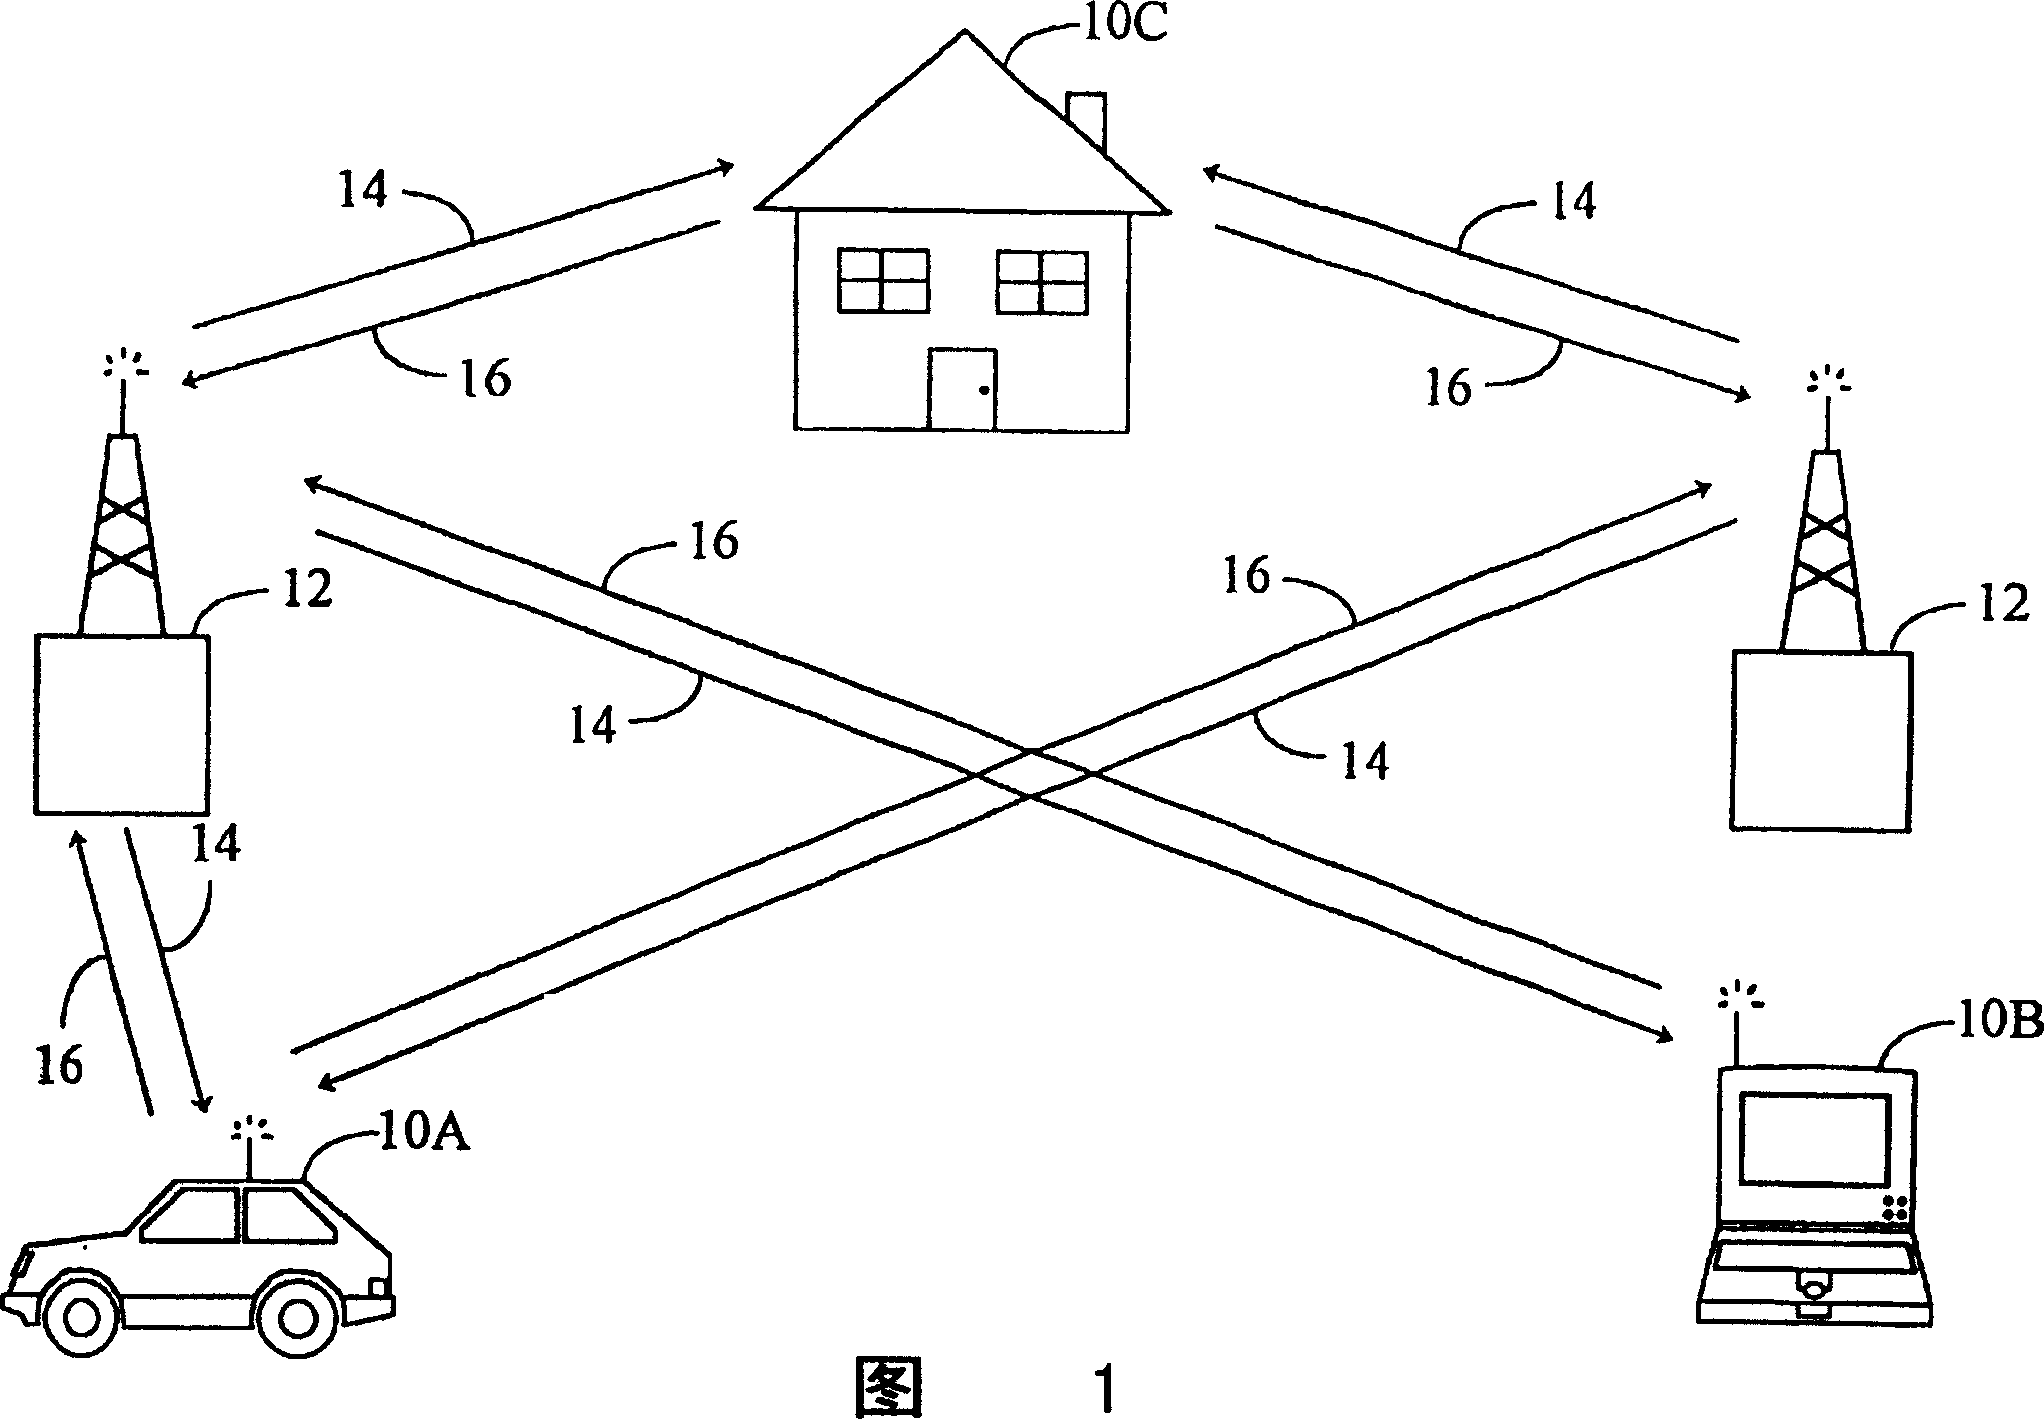 Symbol combiner synchronization after jump to new time alignment and long-distance unit using the method